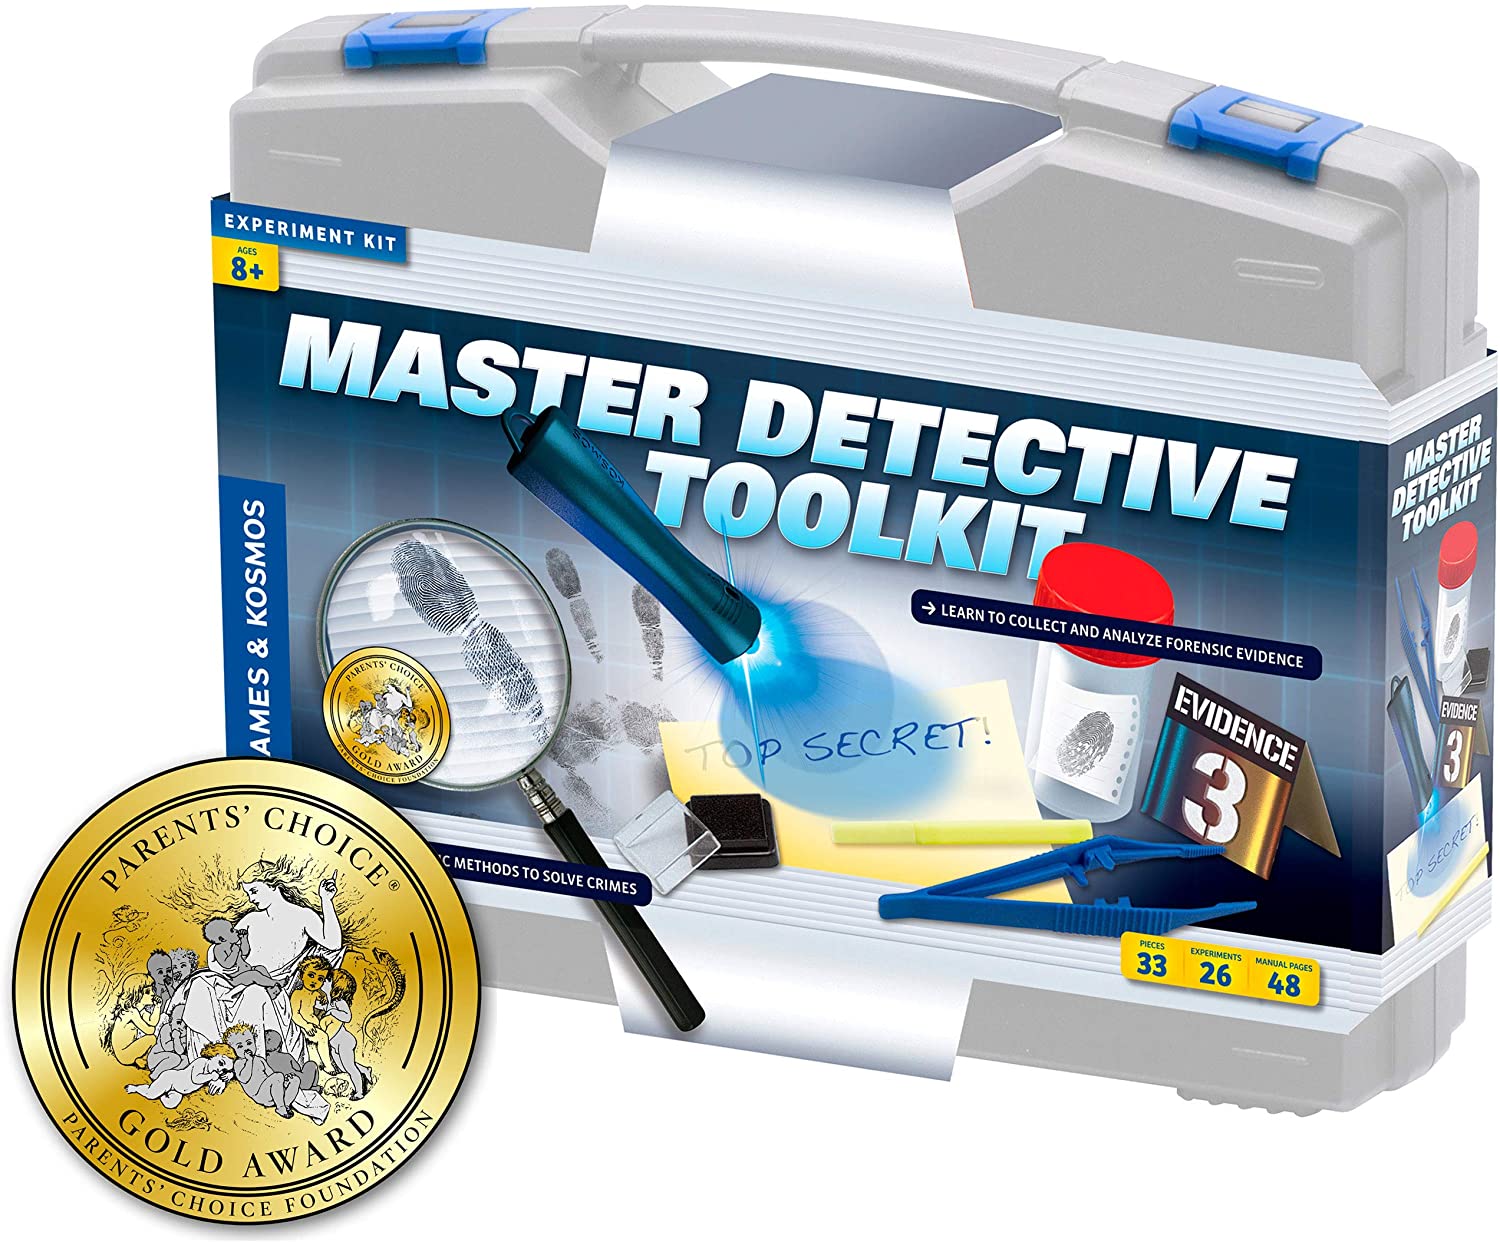 630912 3 DETECTIVES Master Detective Toolkit